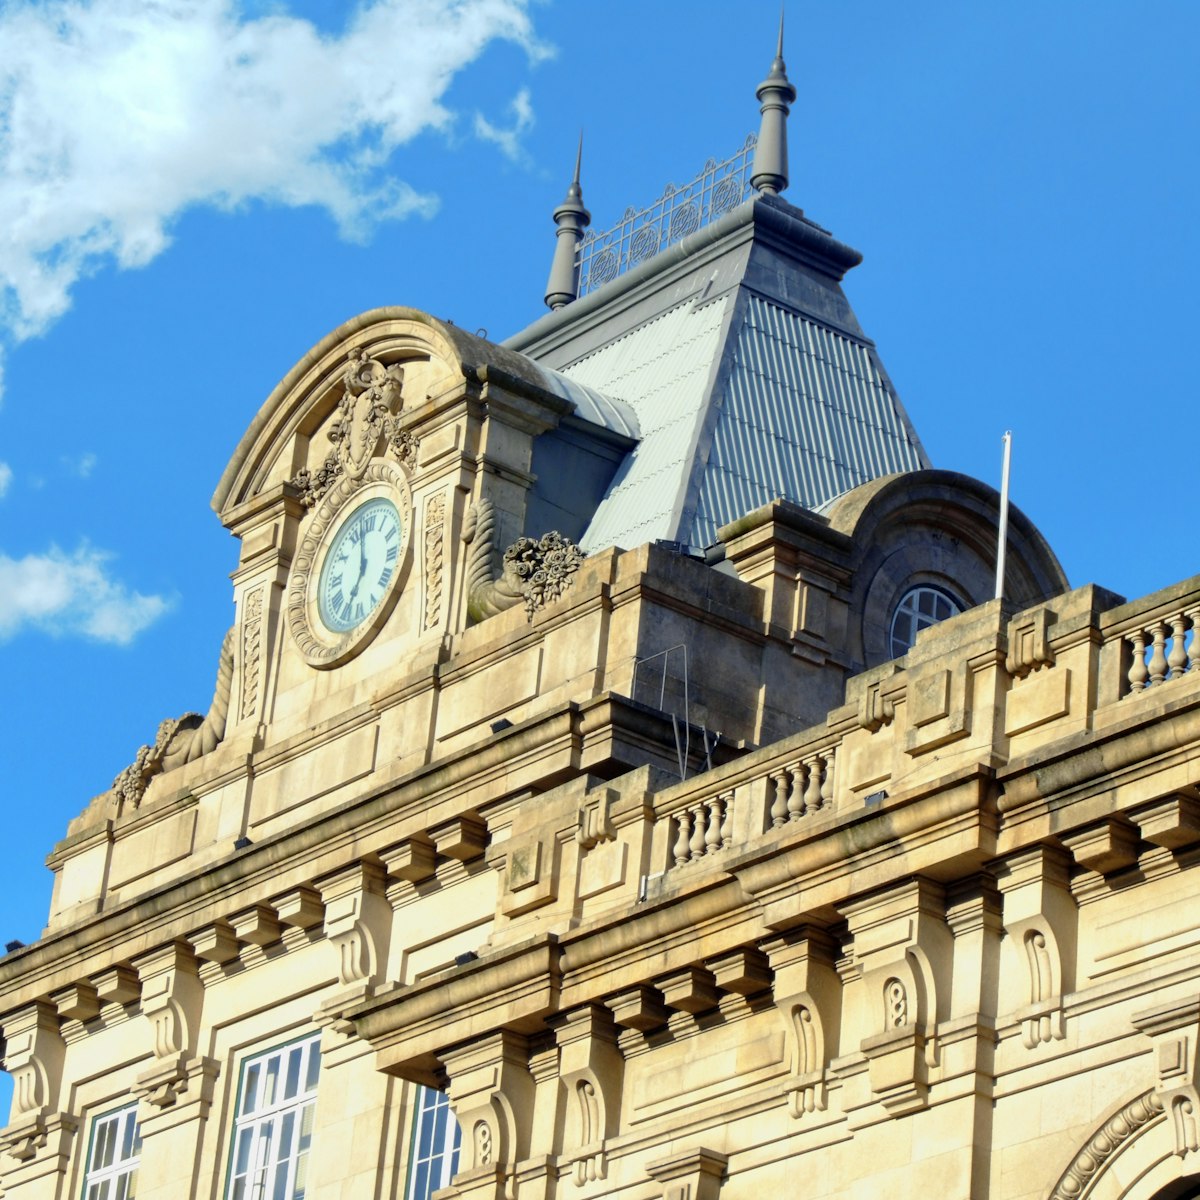 Detail of Sao Bento Train station in Oporto. The first train arrived here in 1896, but the building (designed with a French Renaissance touch) opened in 1903.; Shutterstock ID 7016608; Your name (First / Last): Josh Vogel; GL account no.: 56530; Netsuite department name: Online Design; Full Product or Project name including edition: Digital Content/Sights